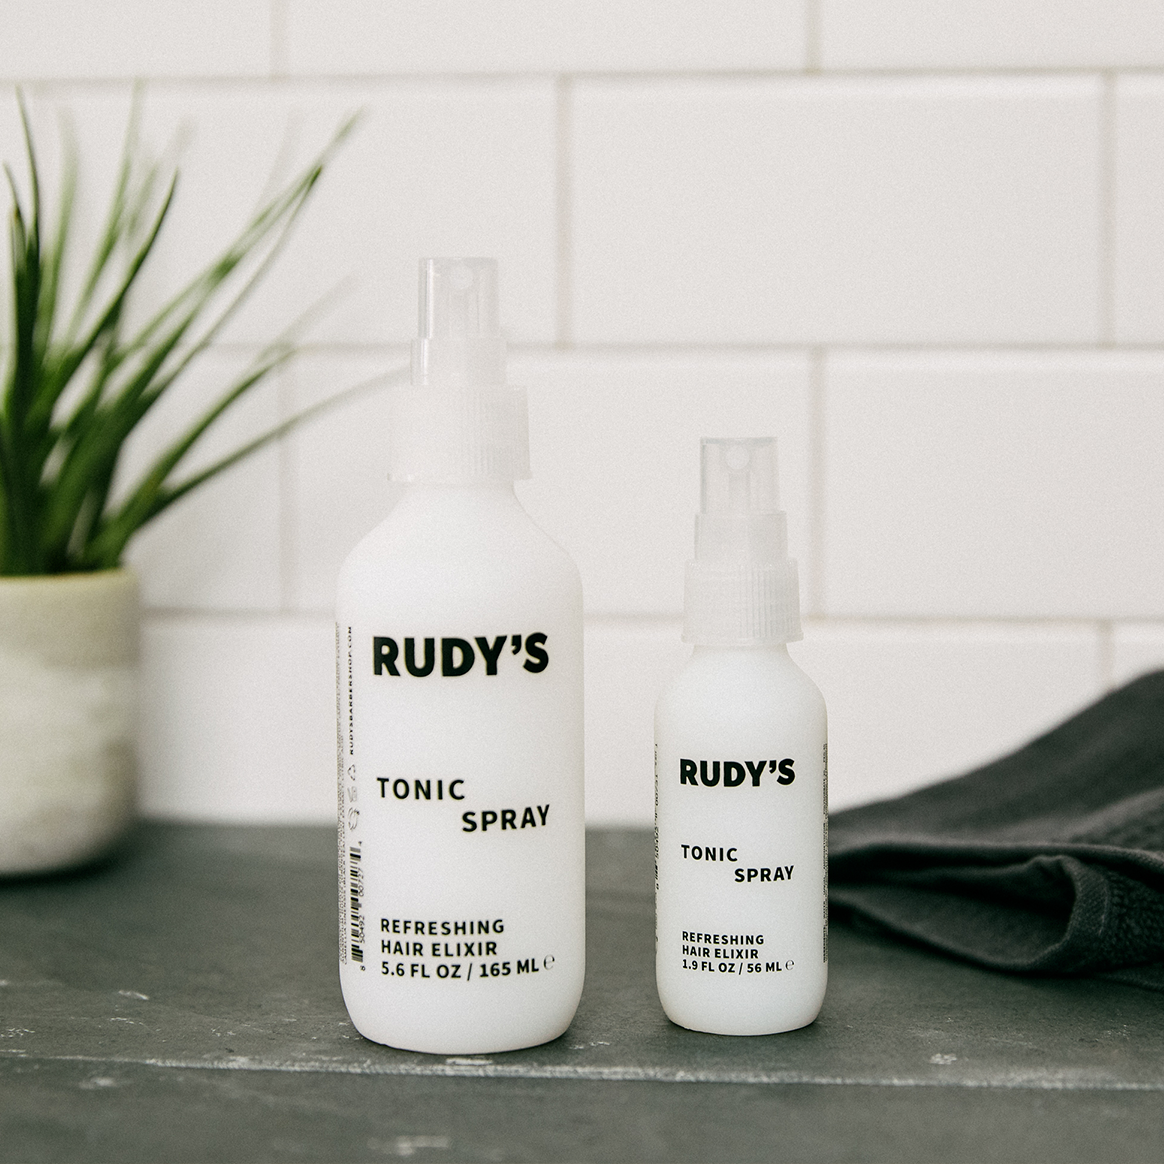 Rudy's Tonic Spray bottles in two formats: Big and Small 